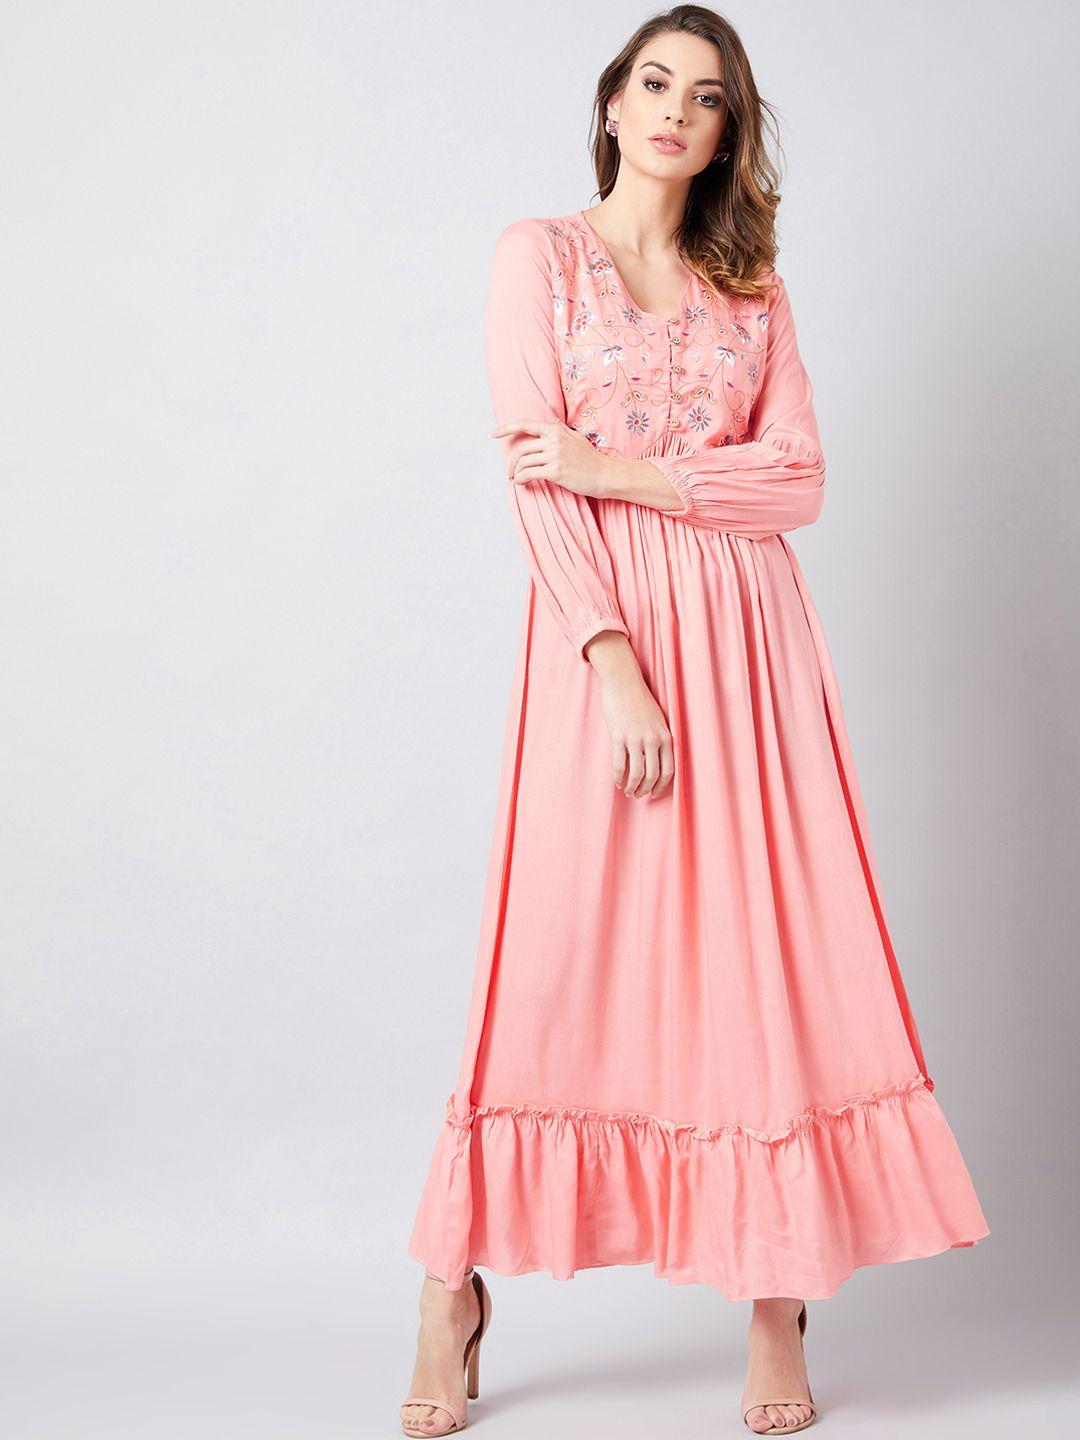 athena women peach-coloured floral embroidered maxi dress